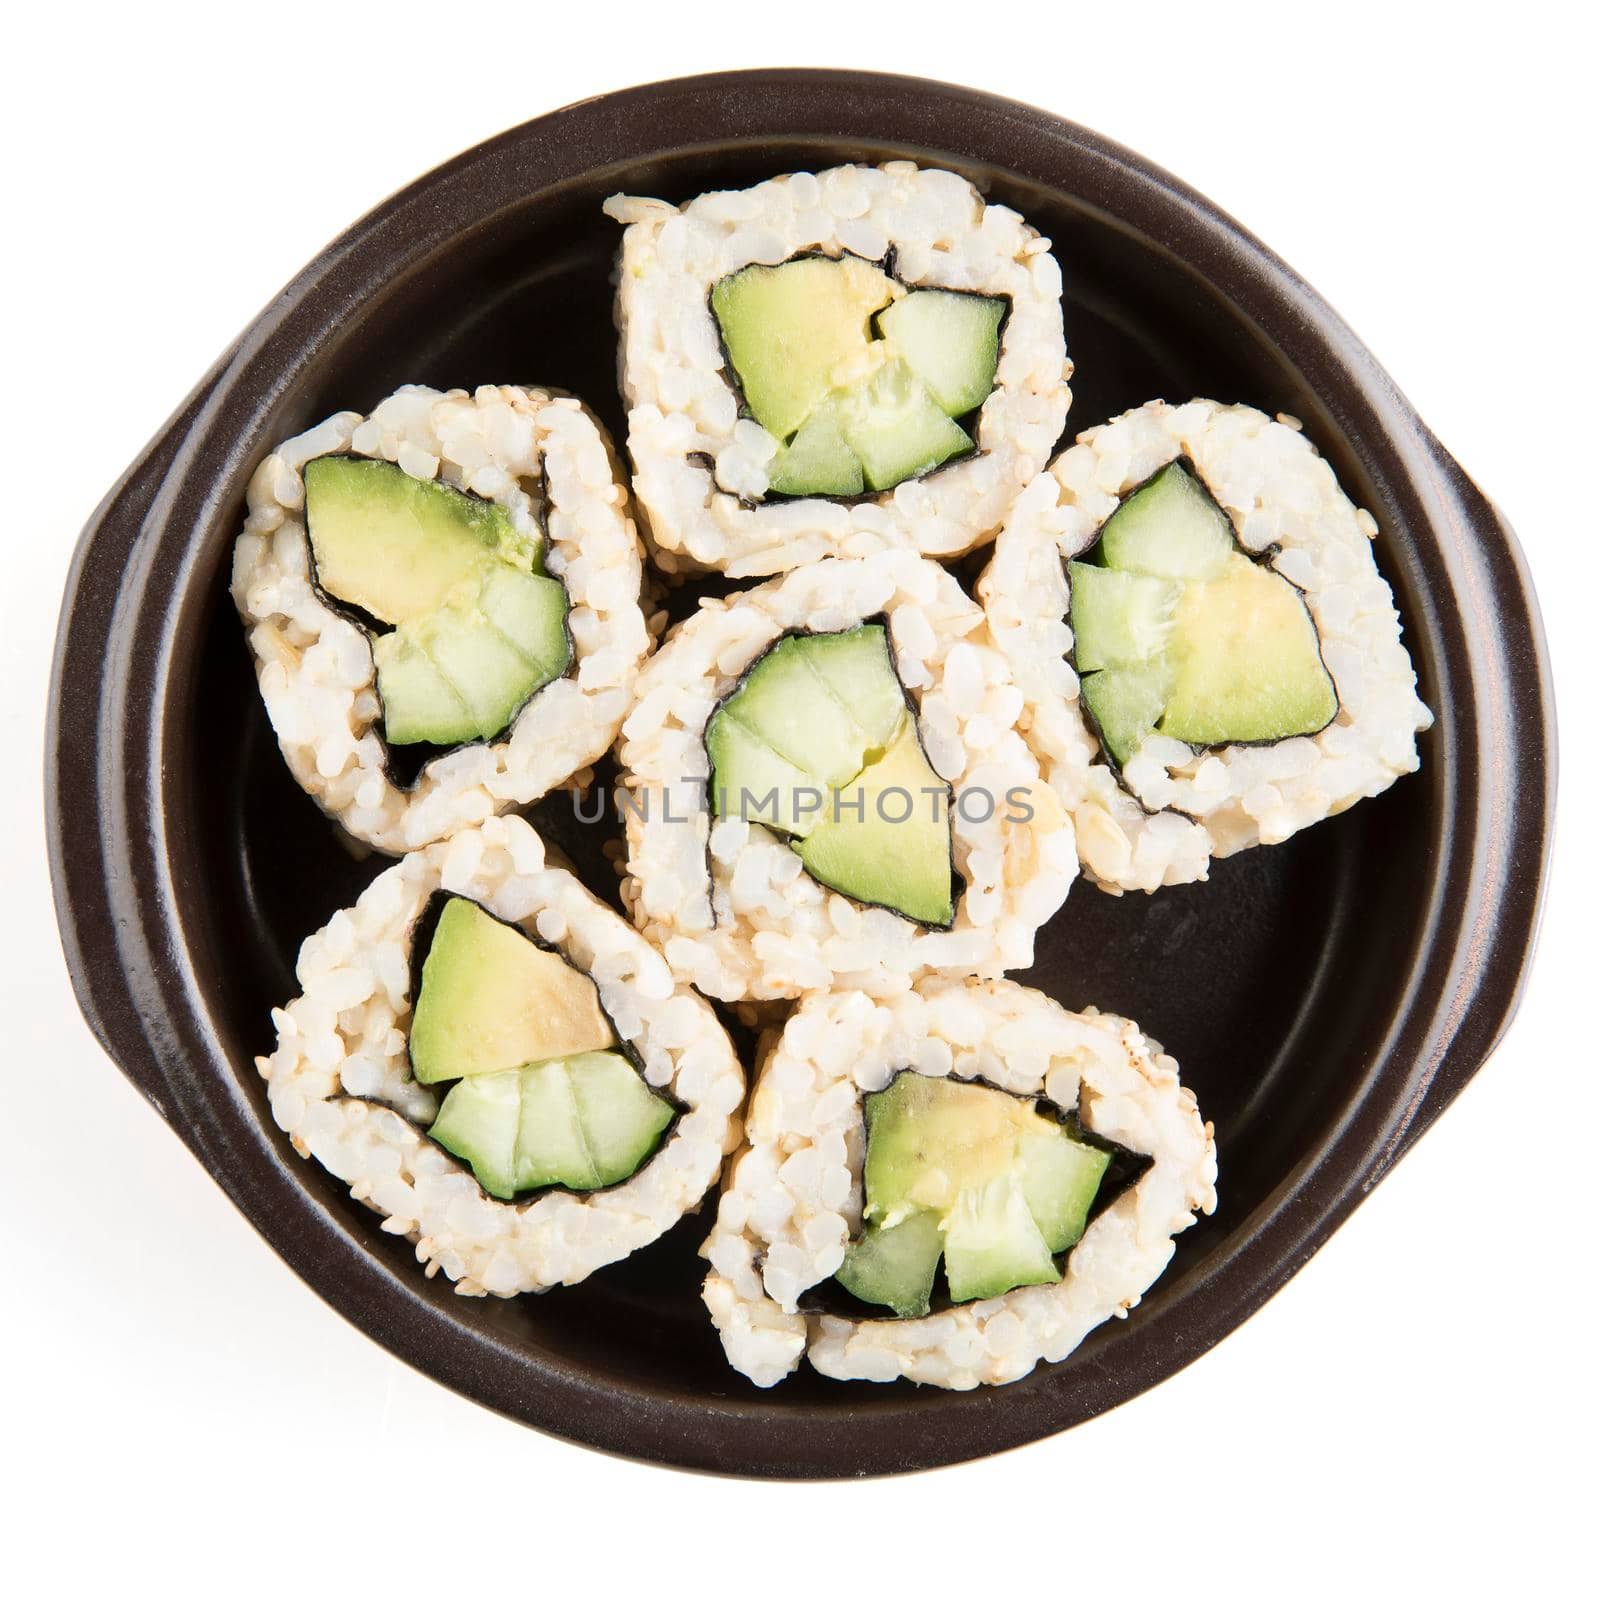 Isolated Cucumber and Avocado Rolls by charlotteLake